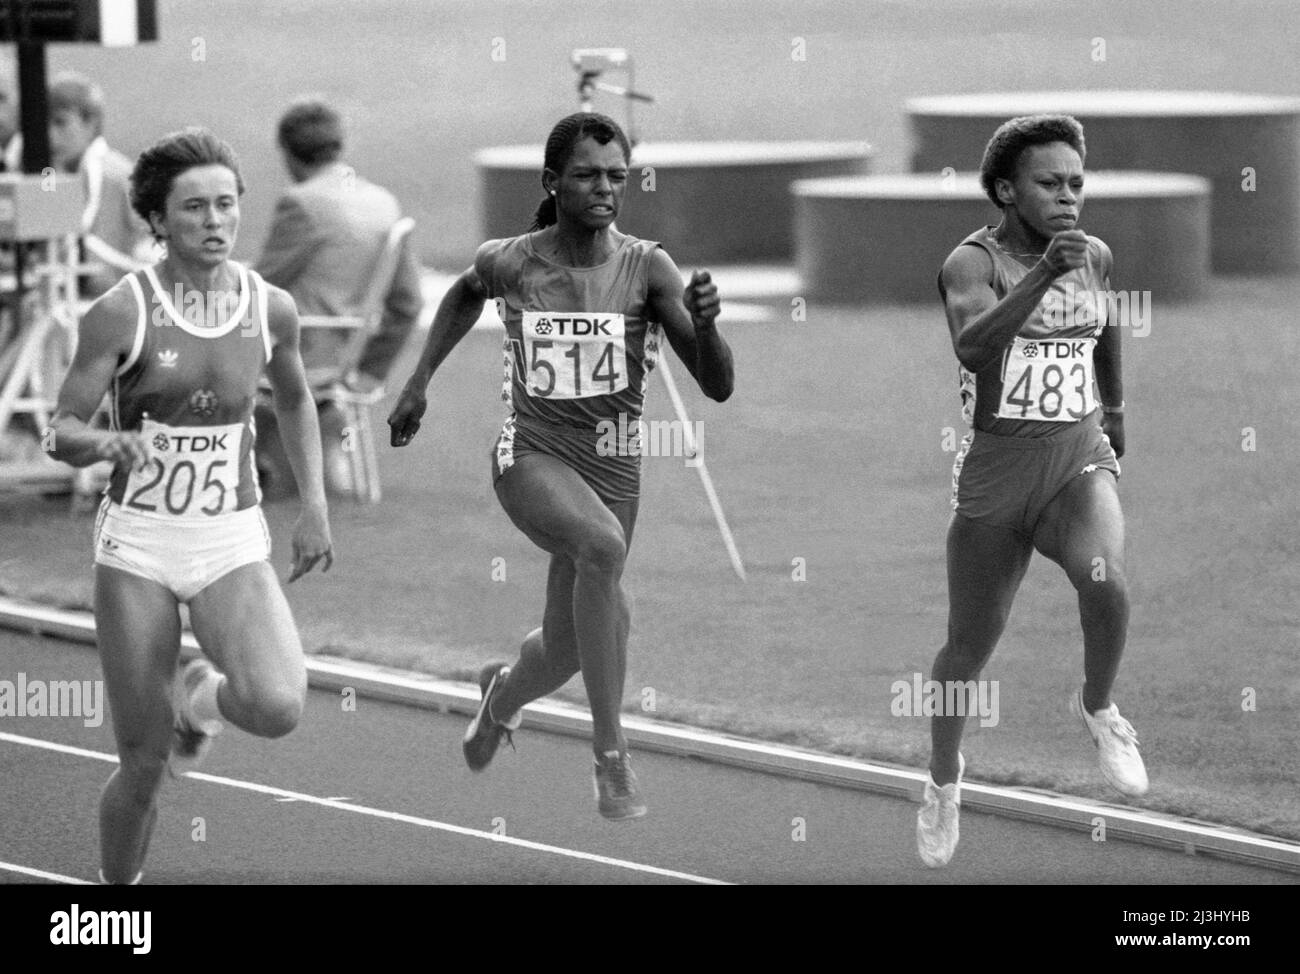 MARLIES GÖHR DDR win 100m before Diane Williams USA /514 / and Alice Brown USA /483/athletes at IAAF World Champion Ship in Helsinki Finland 1983 august Stock Photo